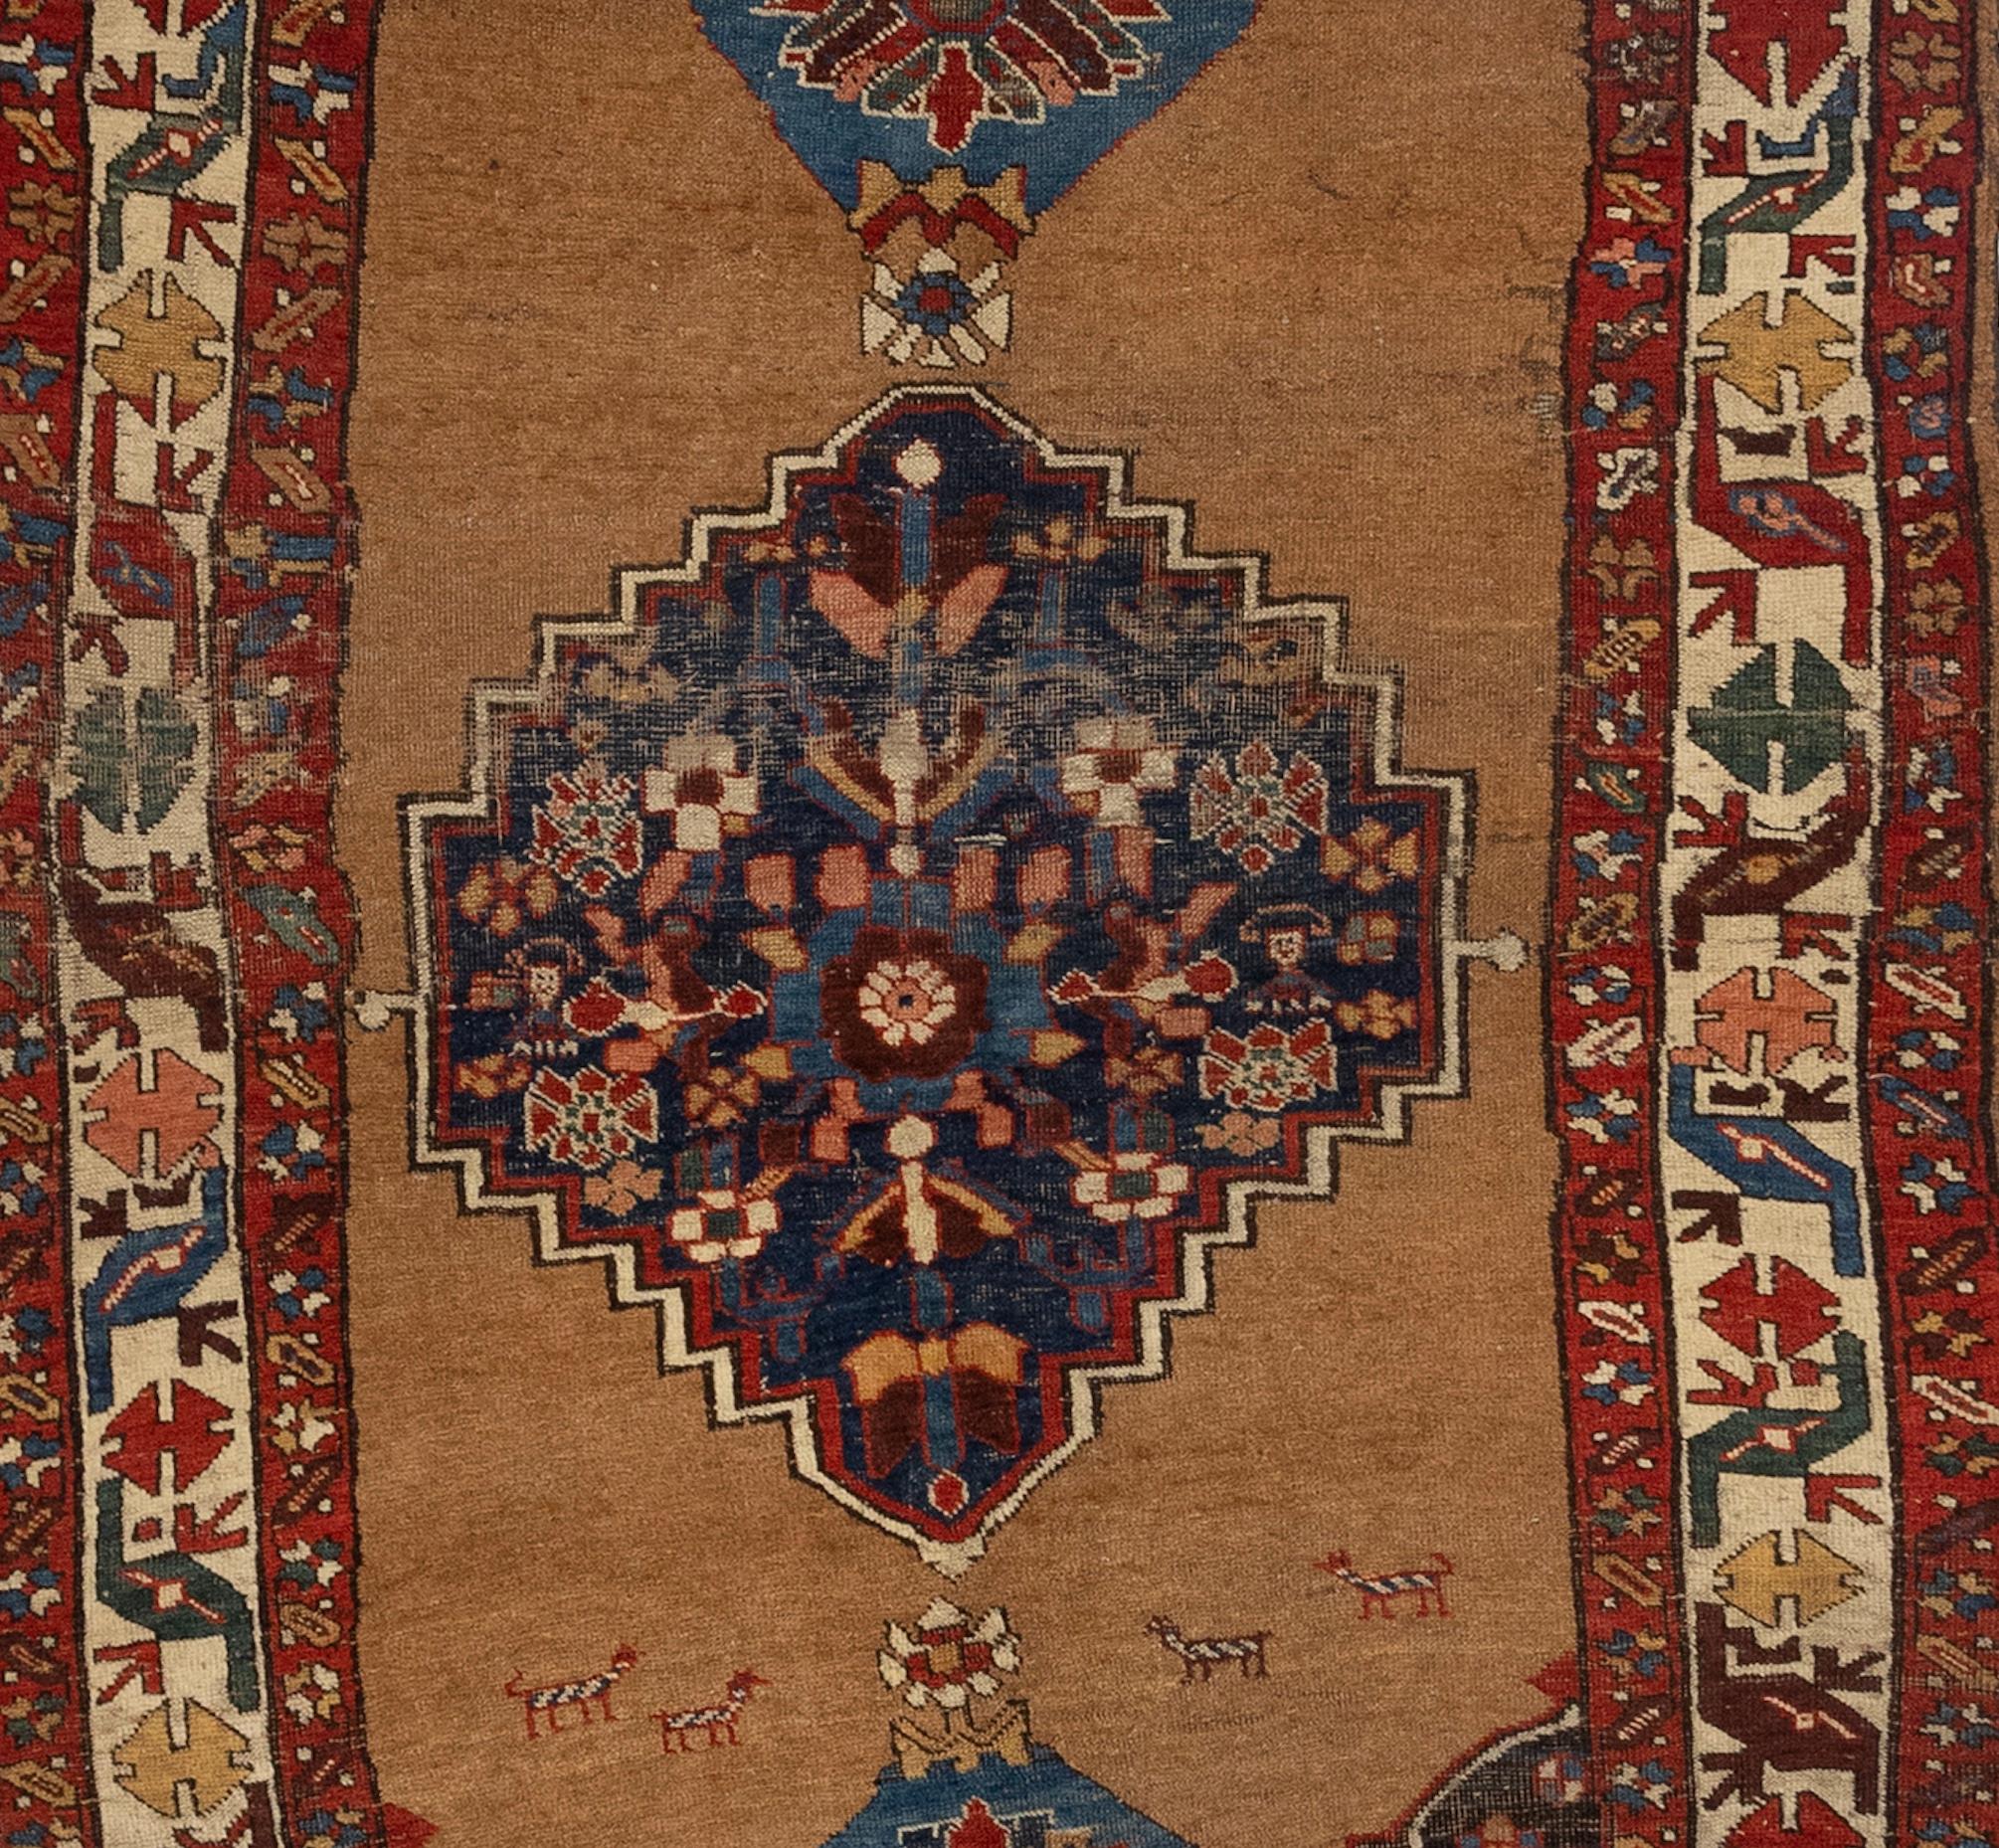 This antique Bijar rug is an extraordinary piece of woven art that showcases the renowned craftsmanship and distinctive style of Bijar rugs, originating from the Bijar region in Iran. Known for their durability and exceptional quality, Bijar rugs